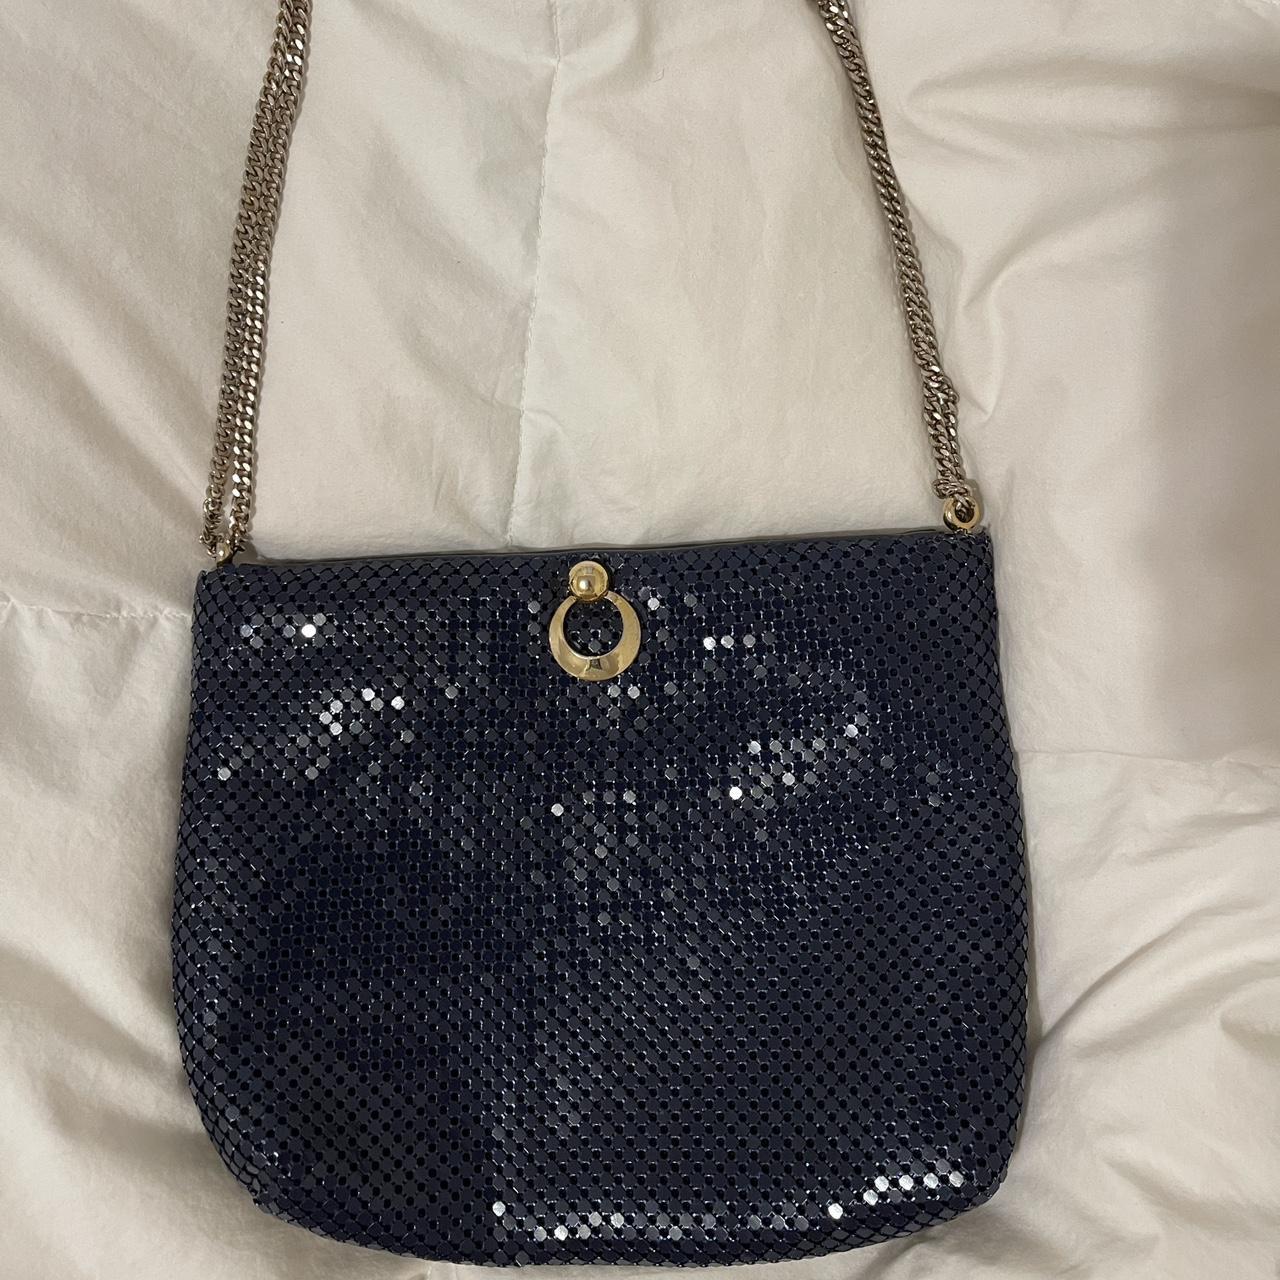 Sequin purse with gold accents and gold chain - Depop